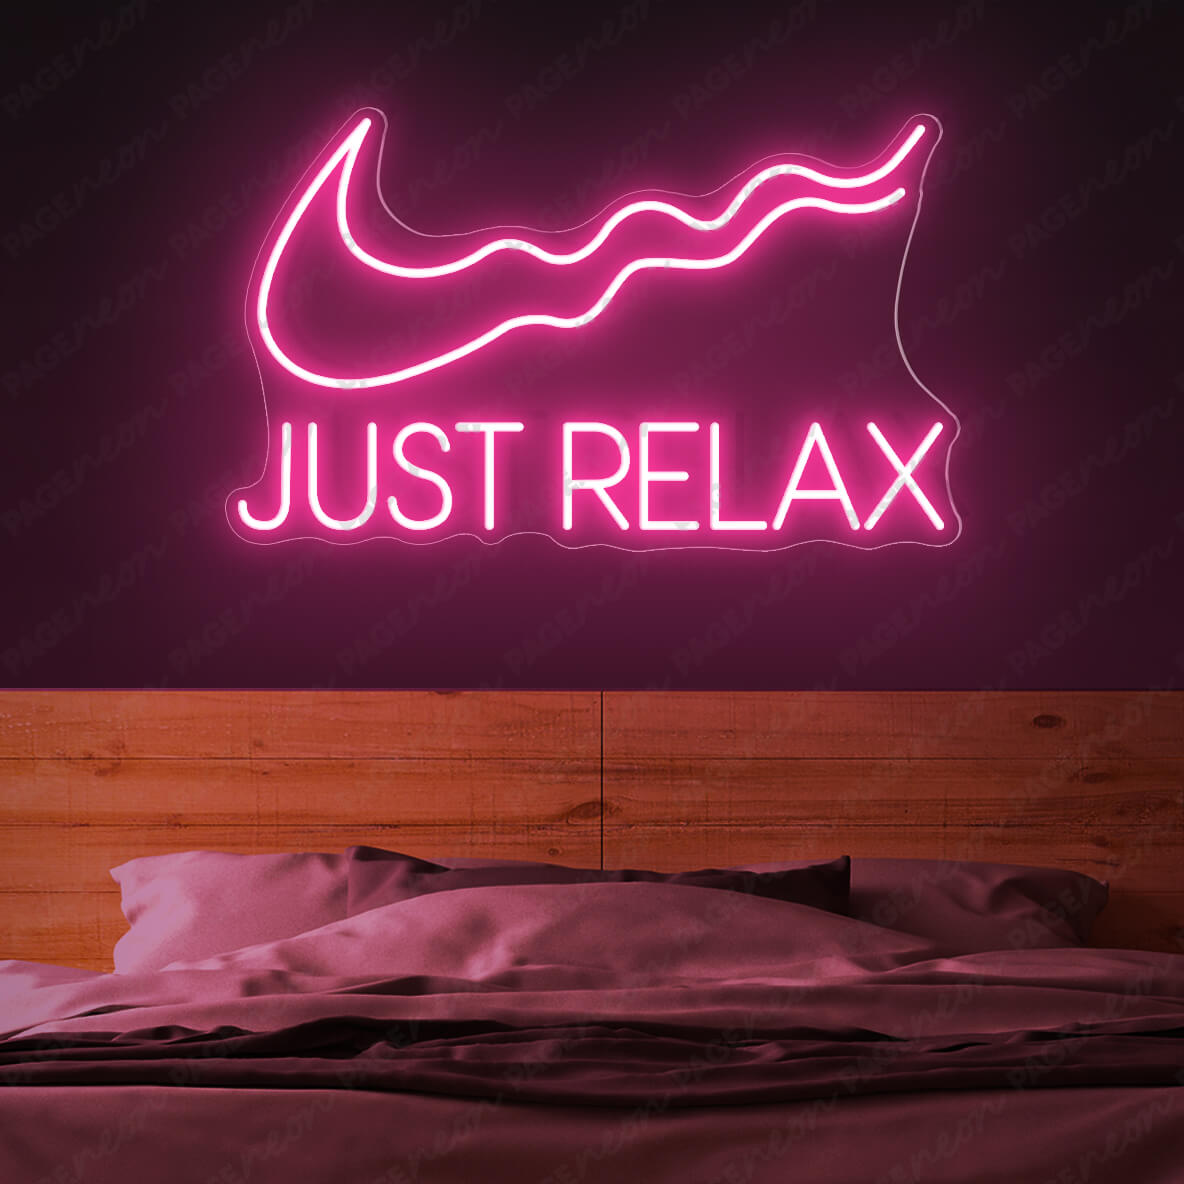 Just Relax Neon Sign Led Light Pink